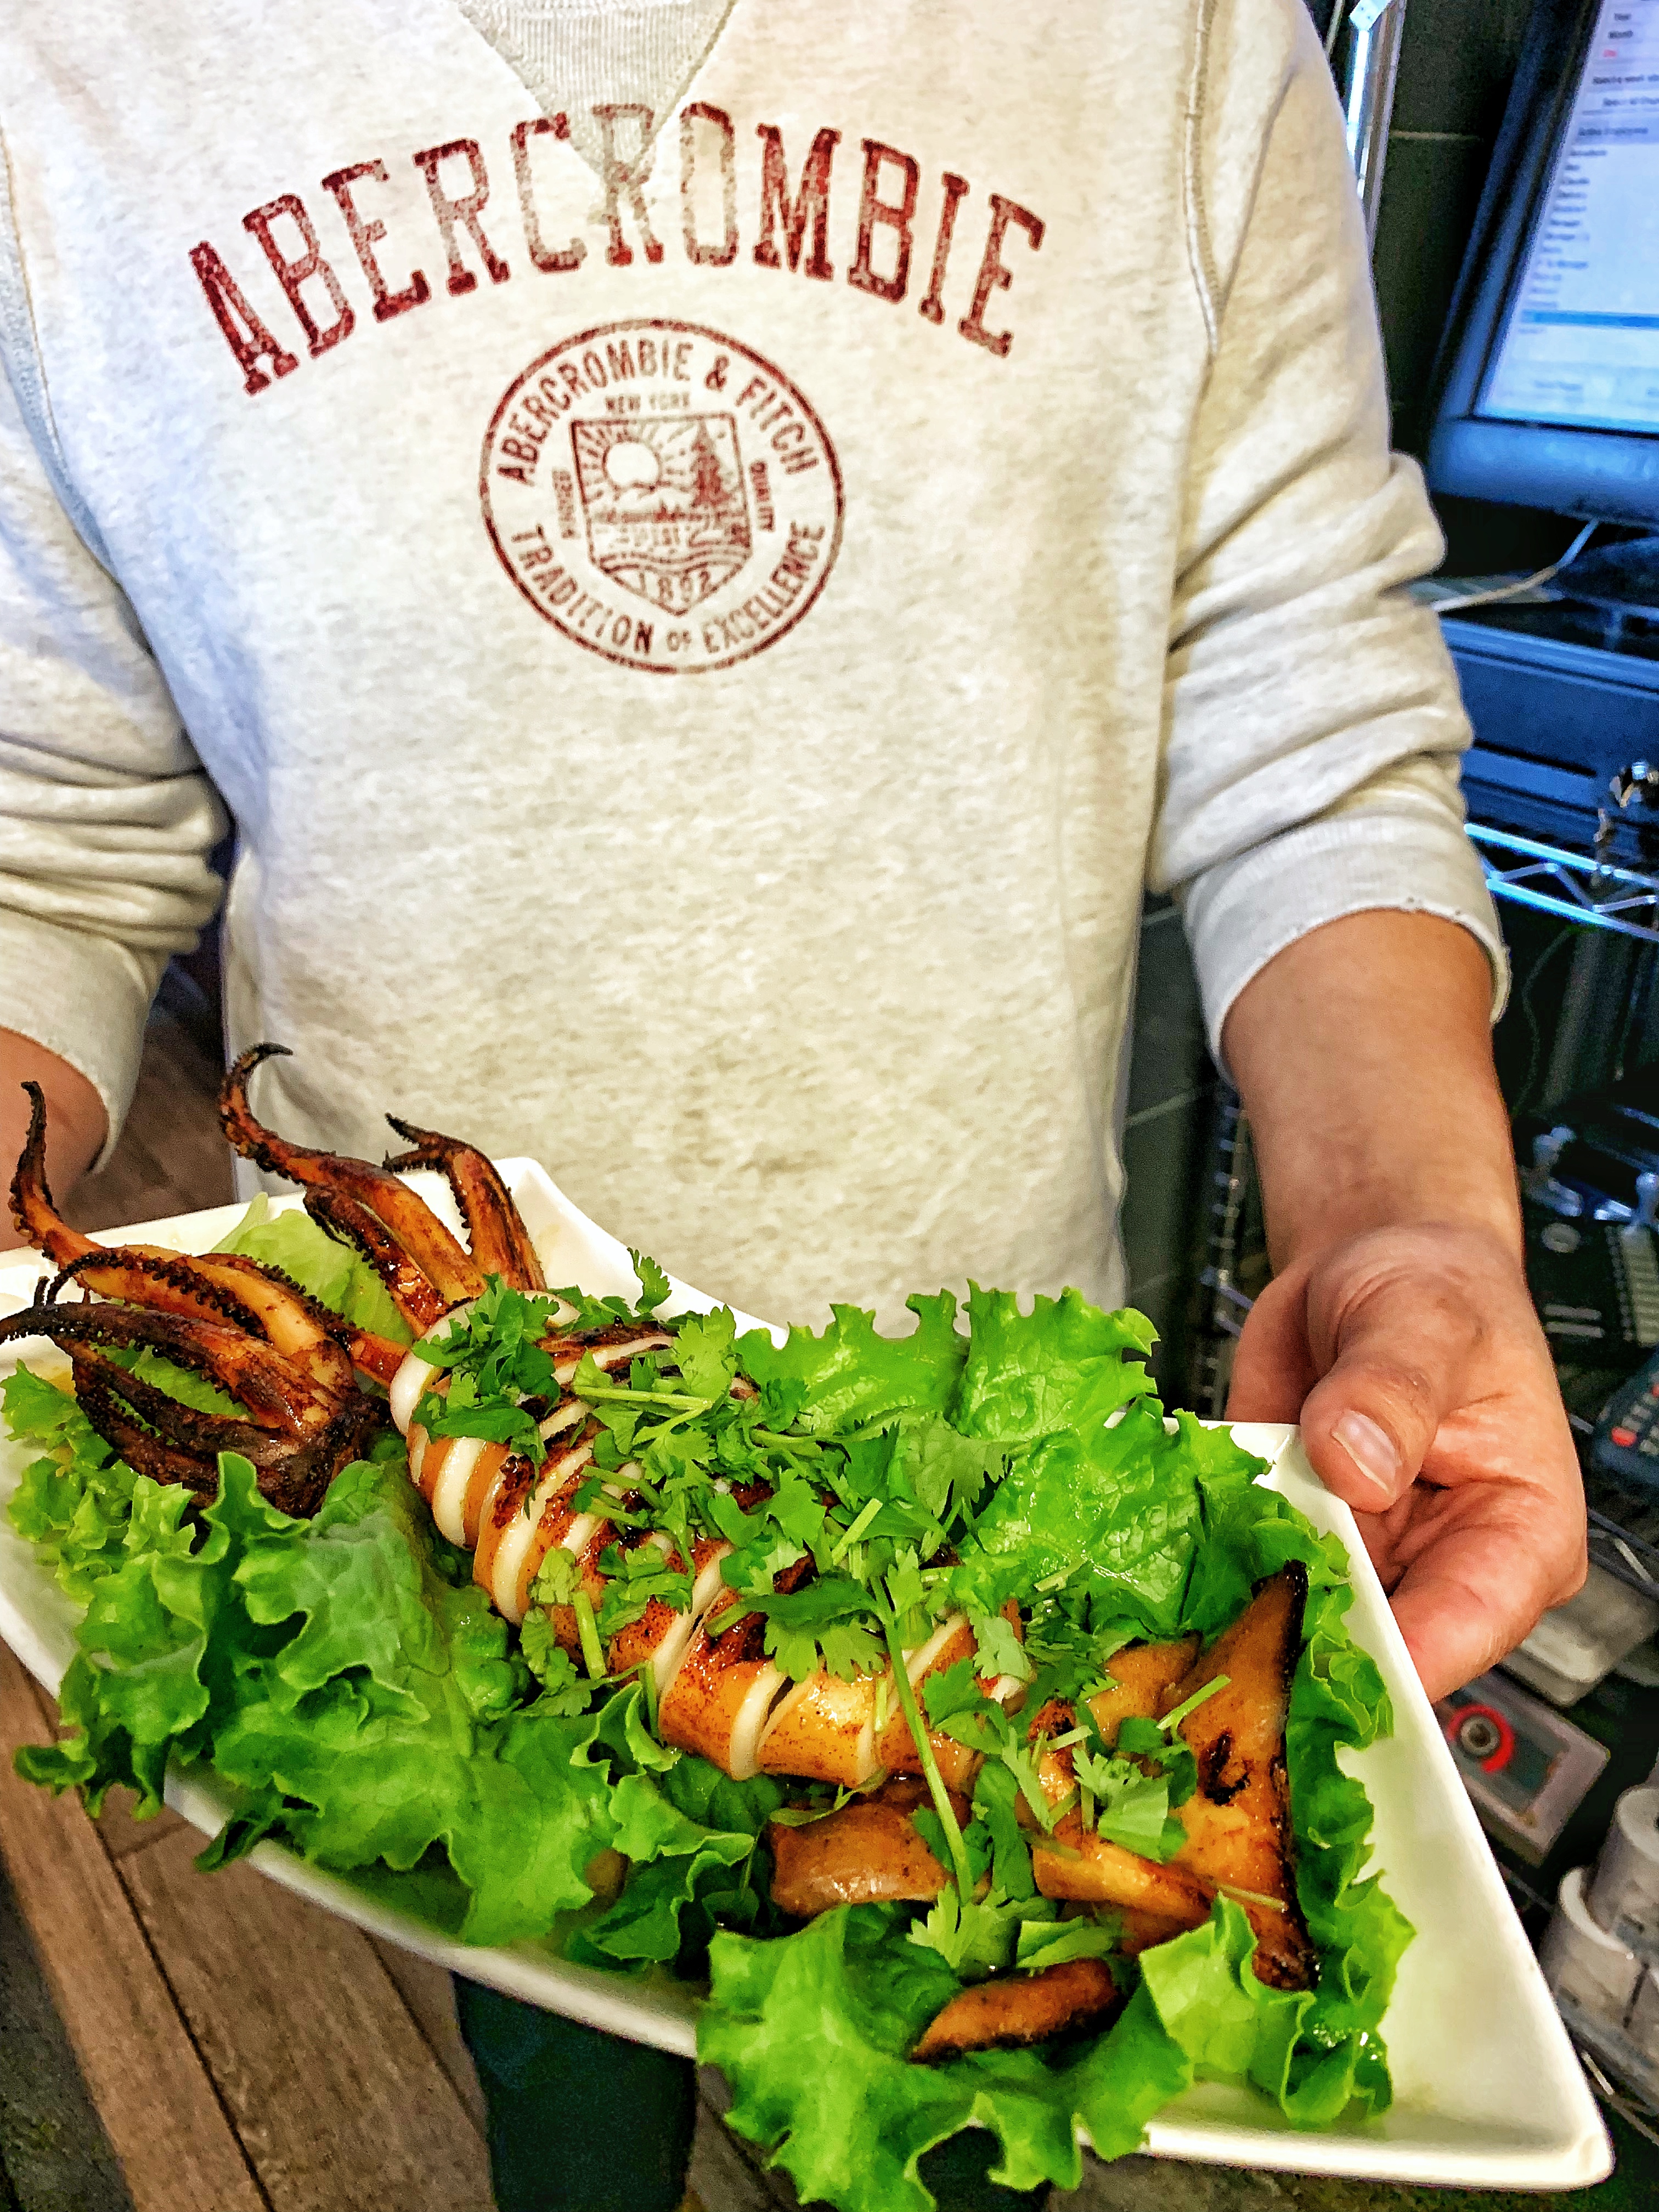 A server holding a plate of Grilled Squid on a bed of lettuce.